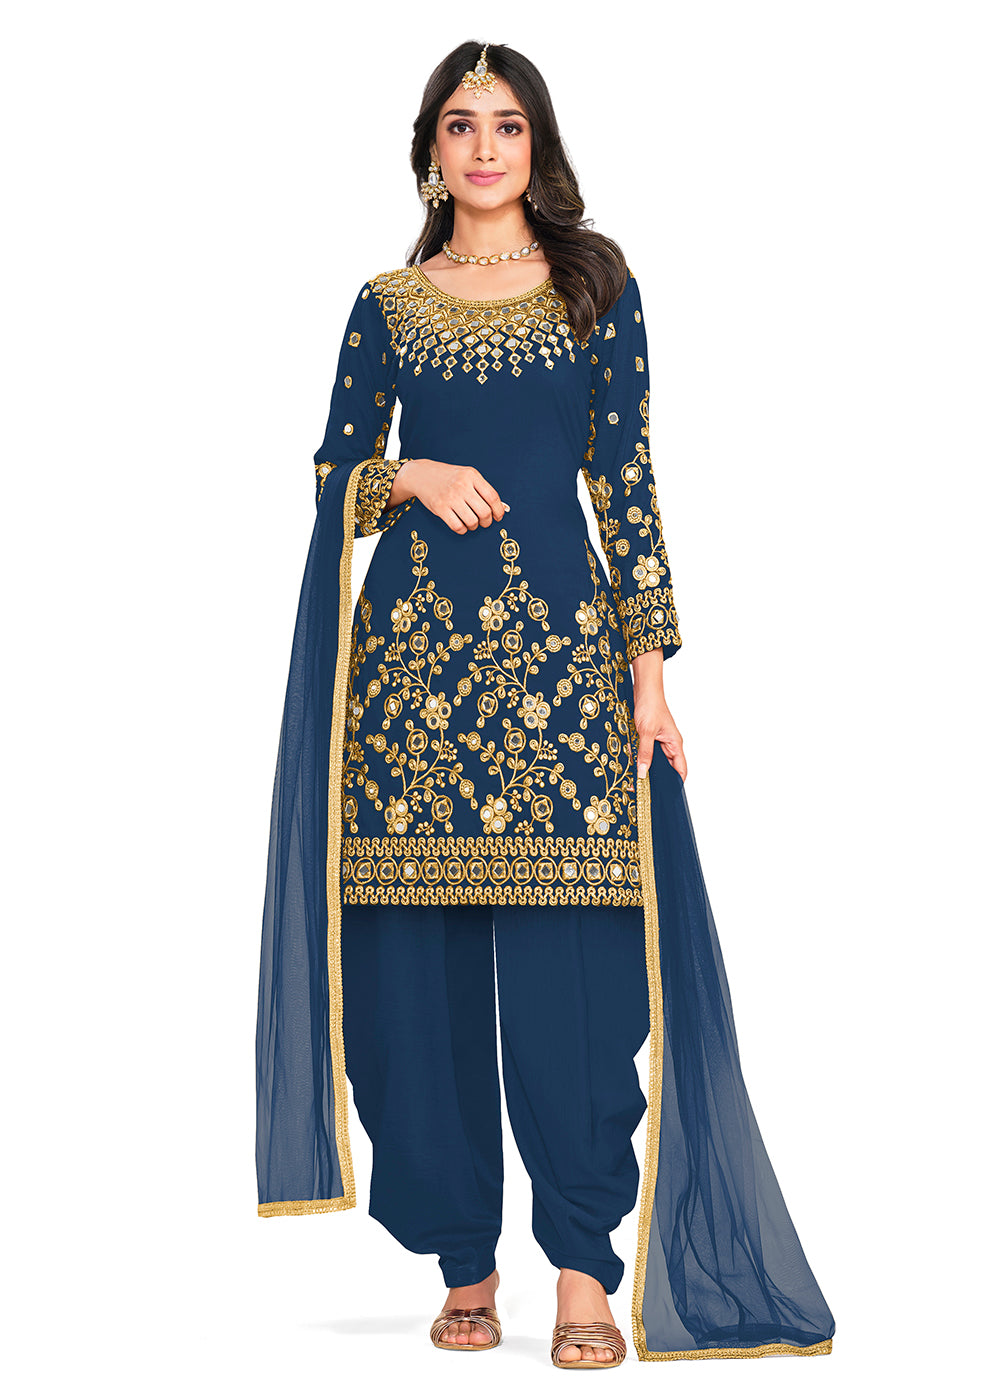 Latest Punjabi Suits with neck work and Golden leggings and gorgeous look.